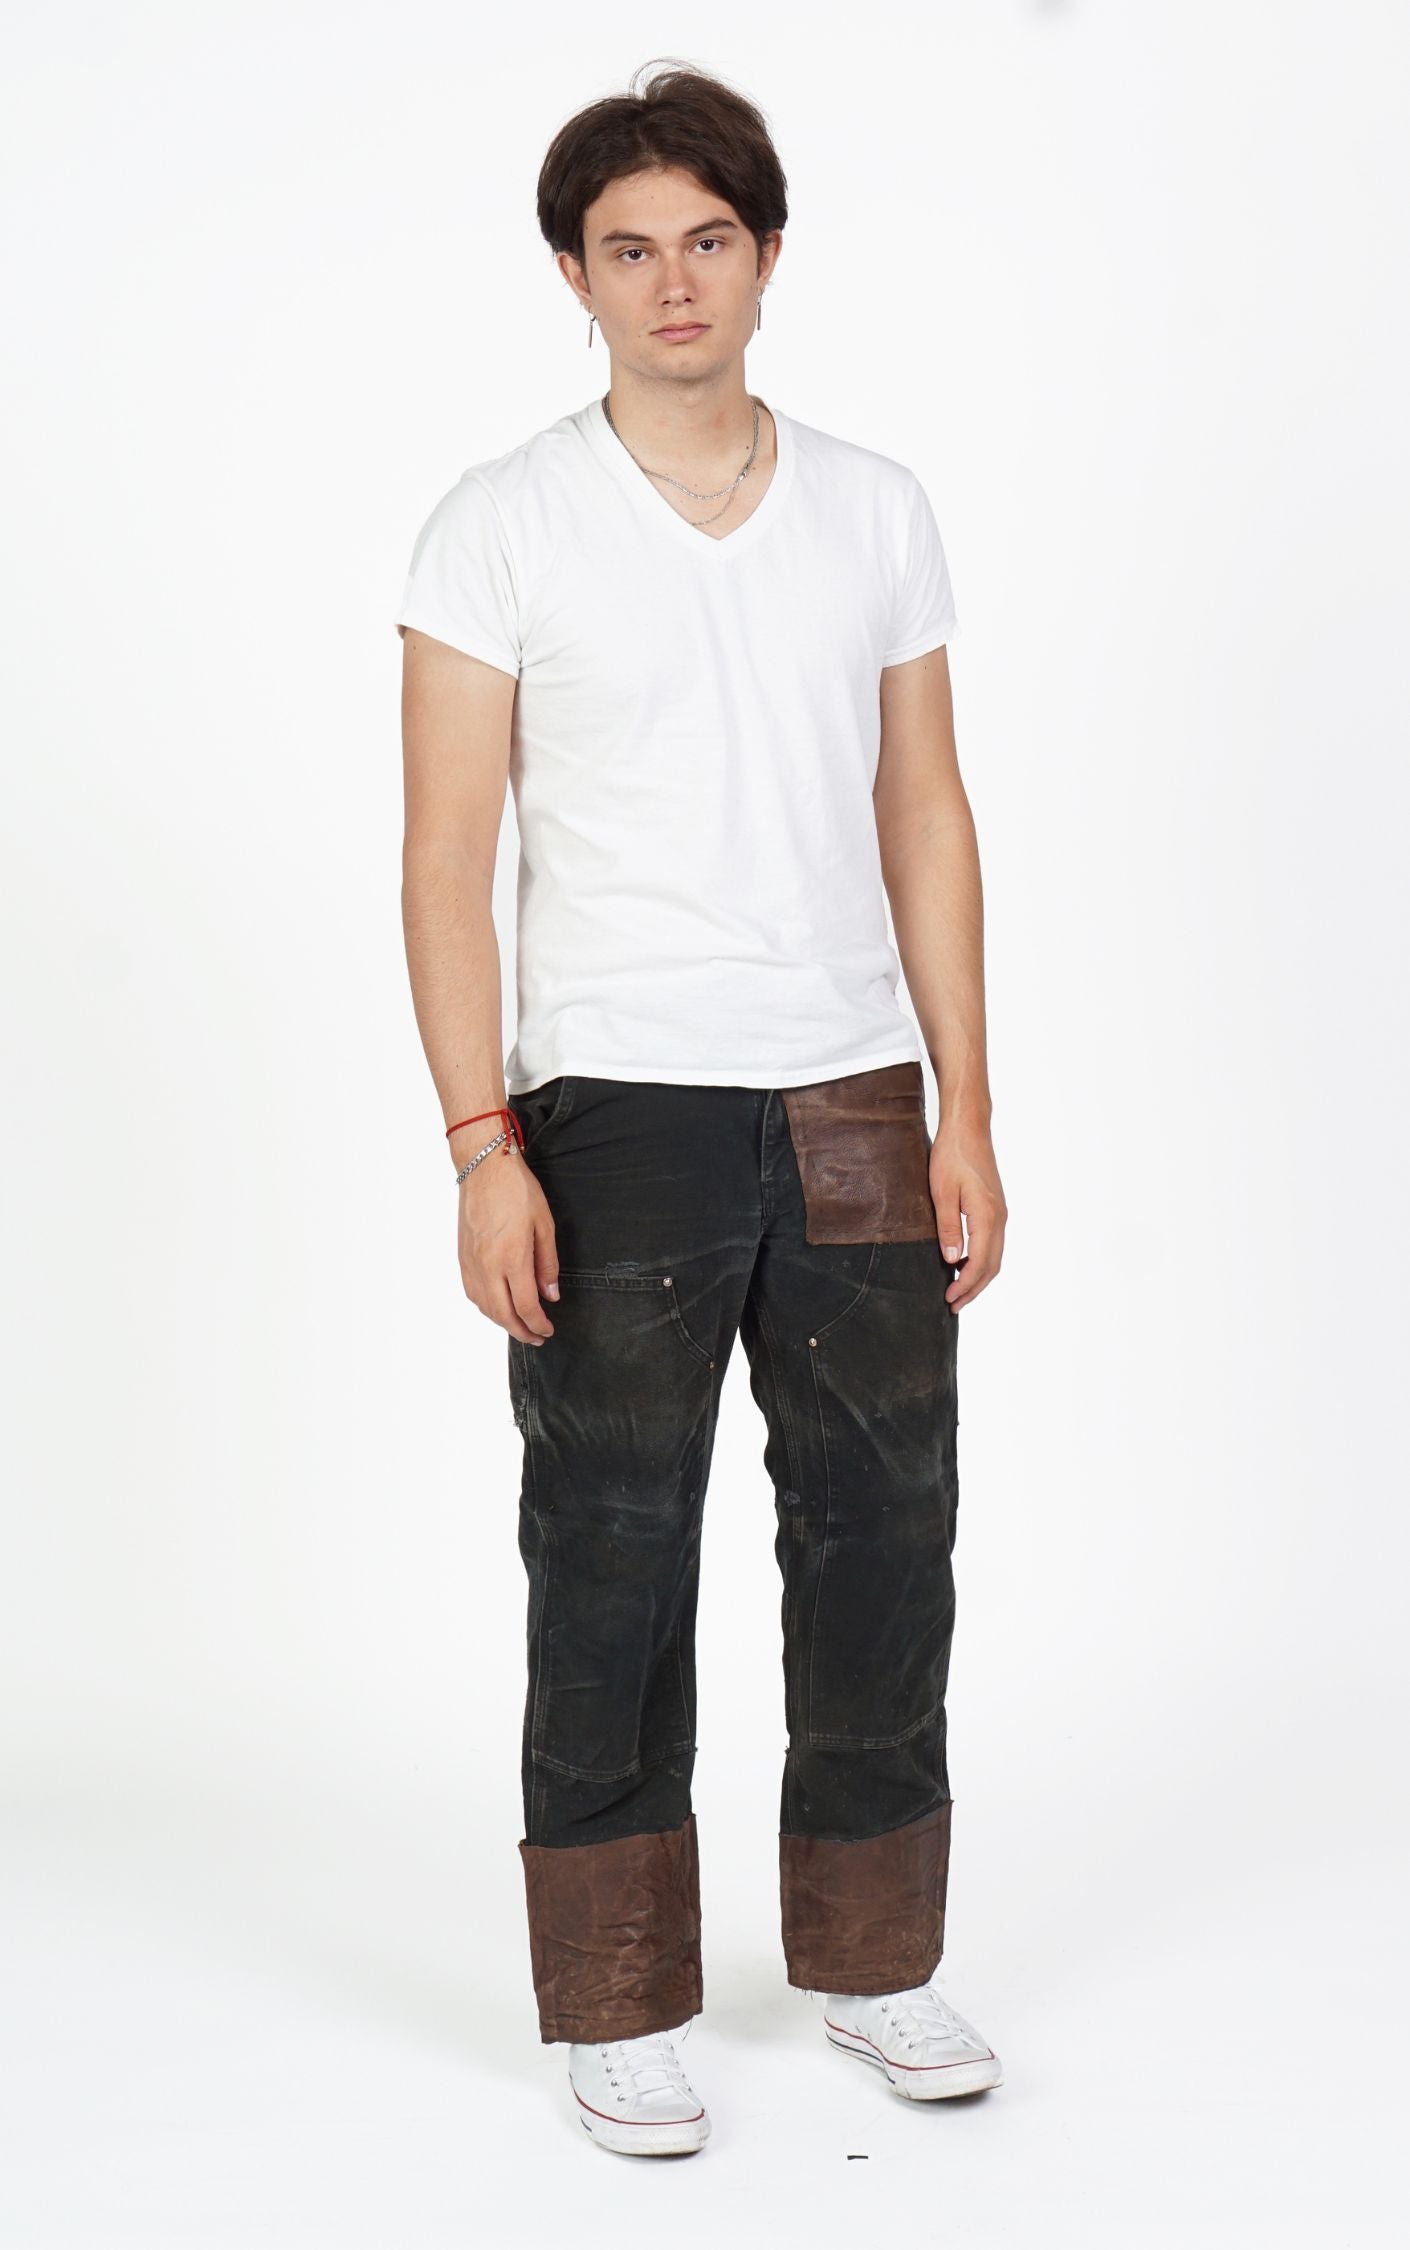 CARHARTT Vintage Cargo Leather Patches Distressed Jeans resellum